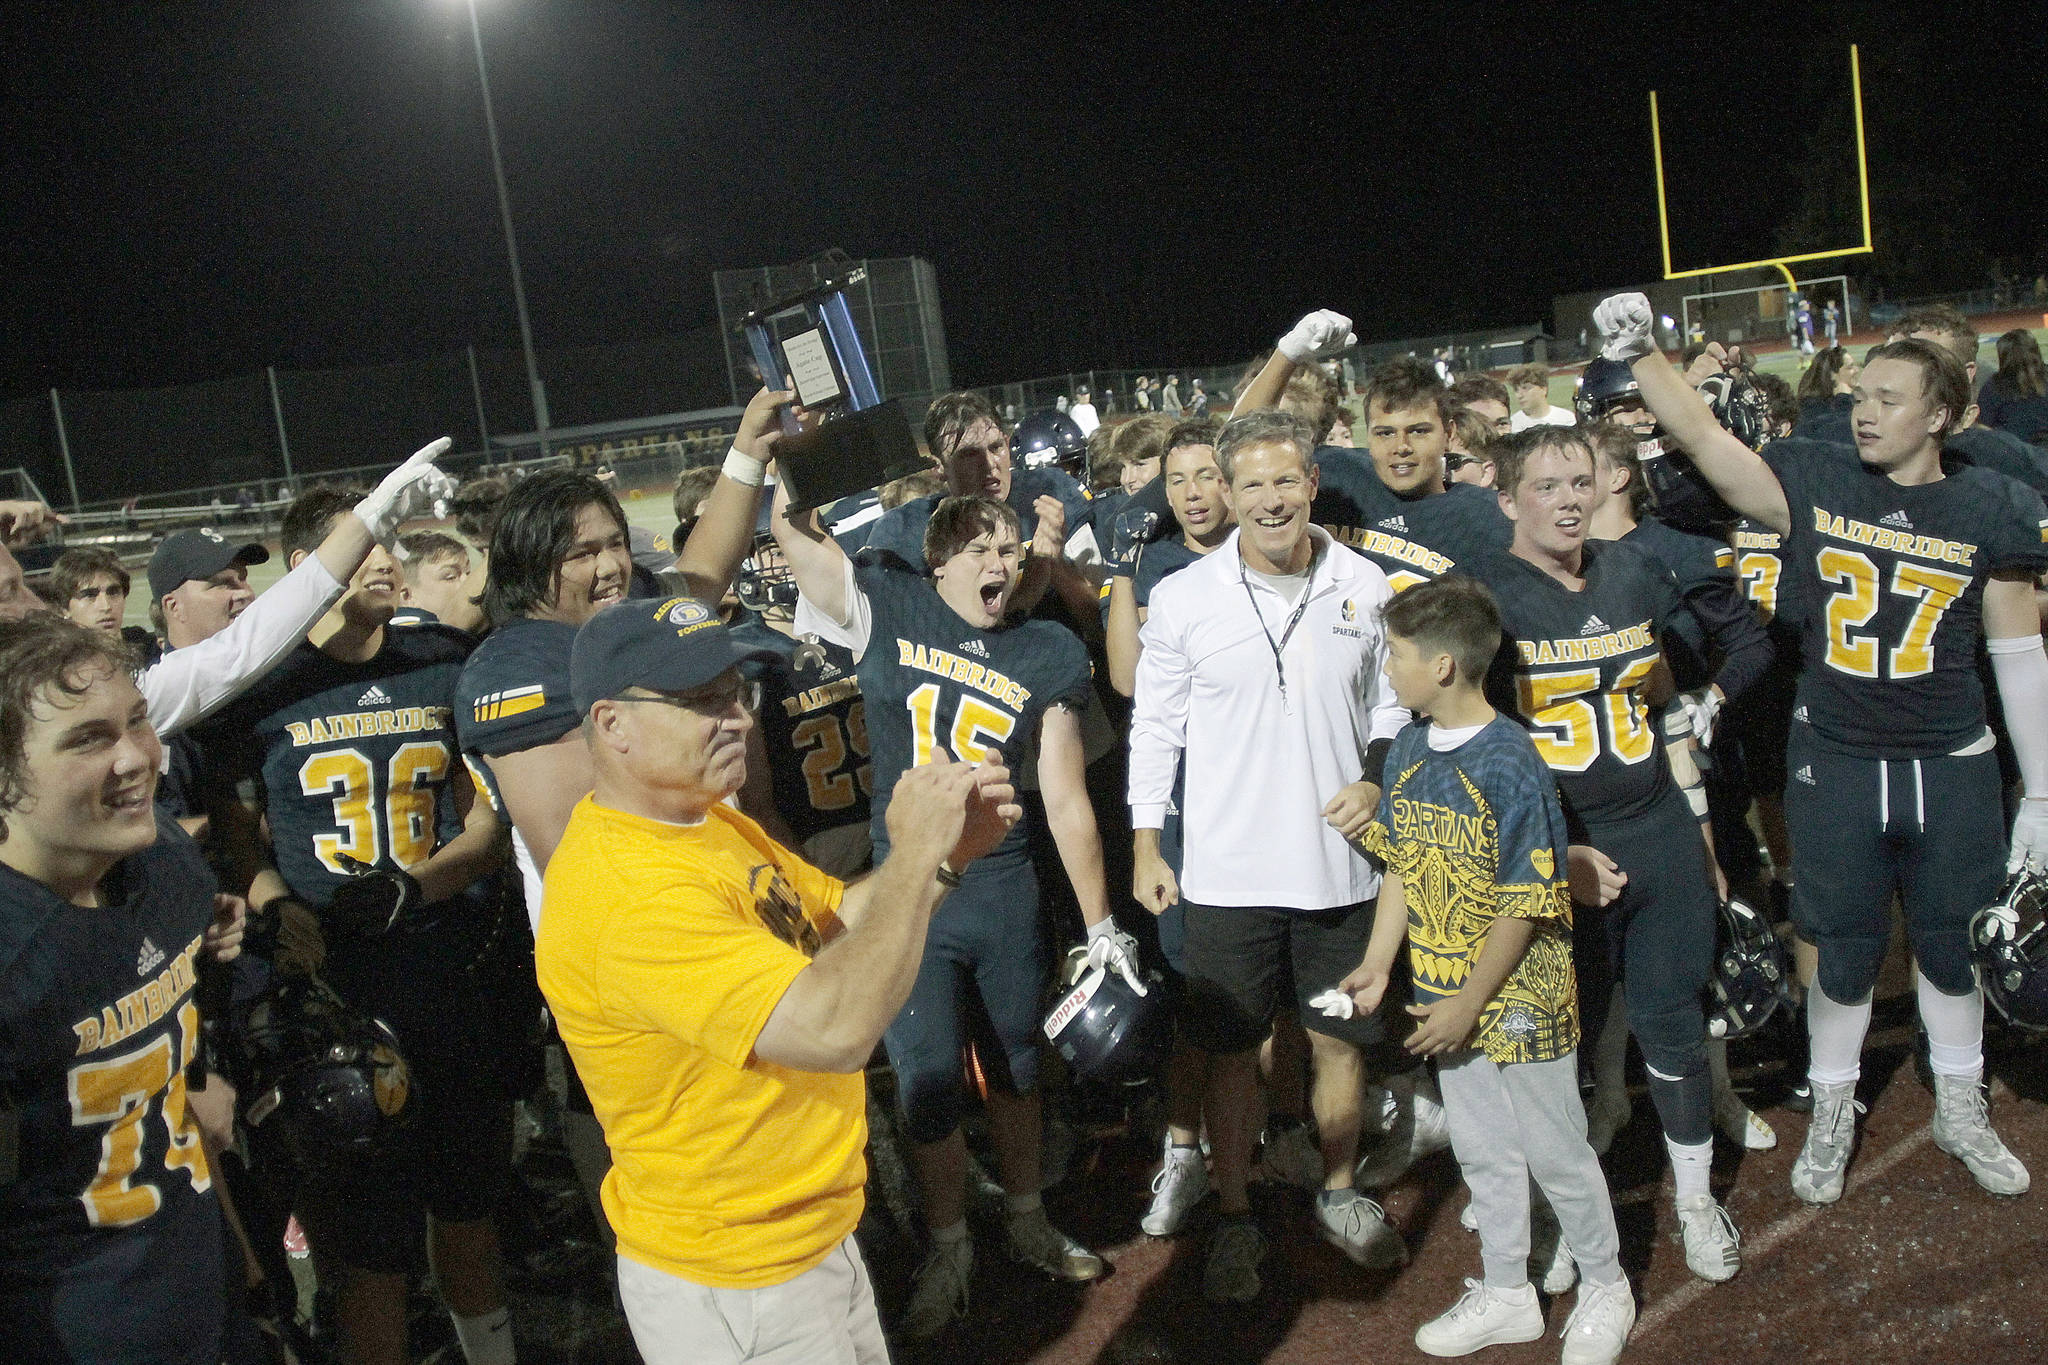 The Bainbridge football team, shown here celebrating their 2019 Agate Cup win over North Kitsap, will have to wait until March of 2021 to get a chance to defend the cup. (Review file photo)